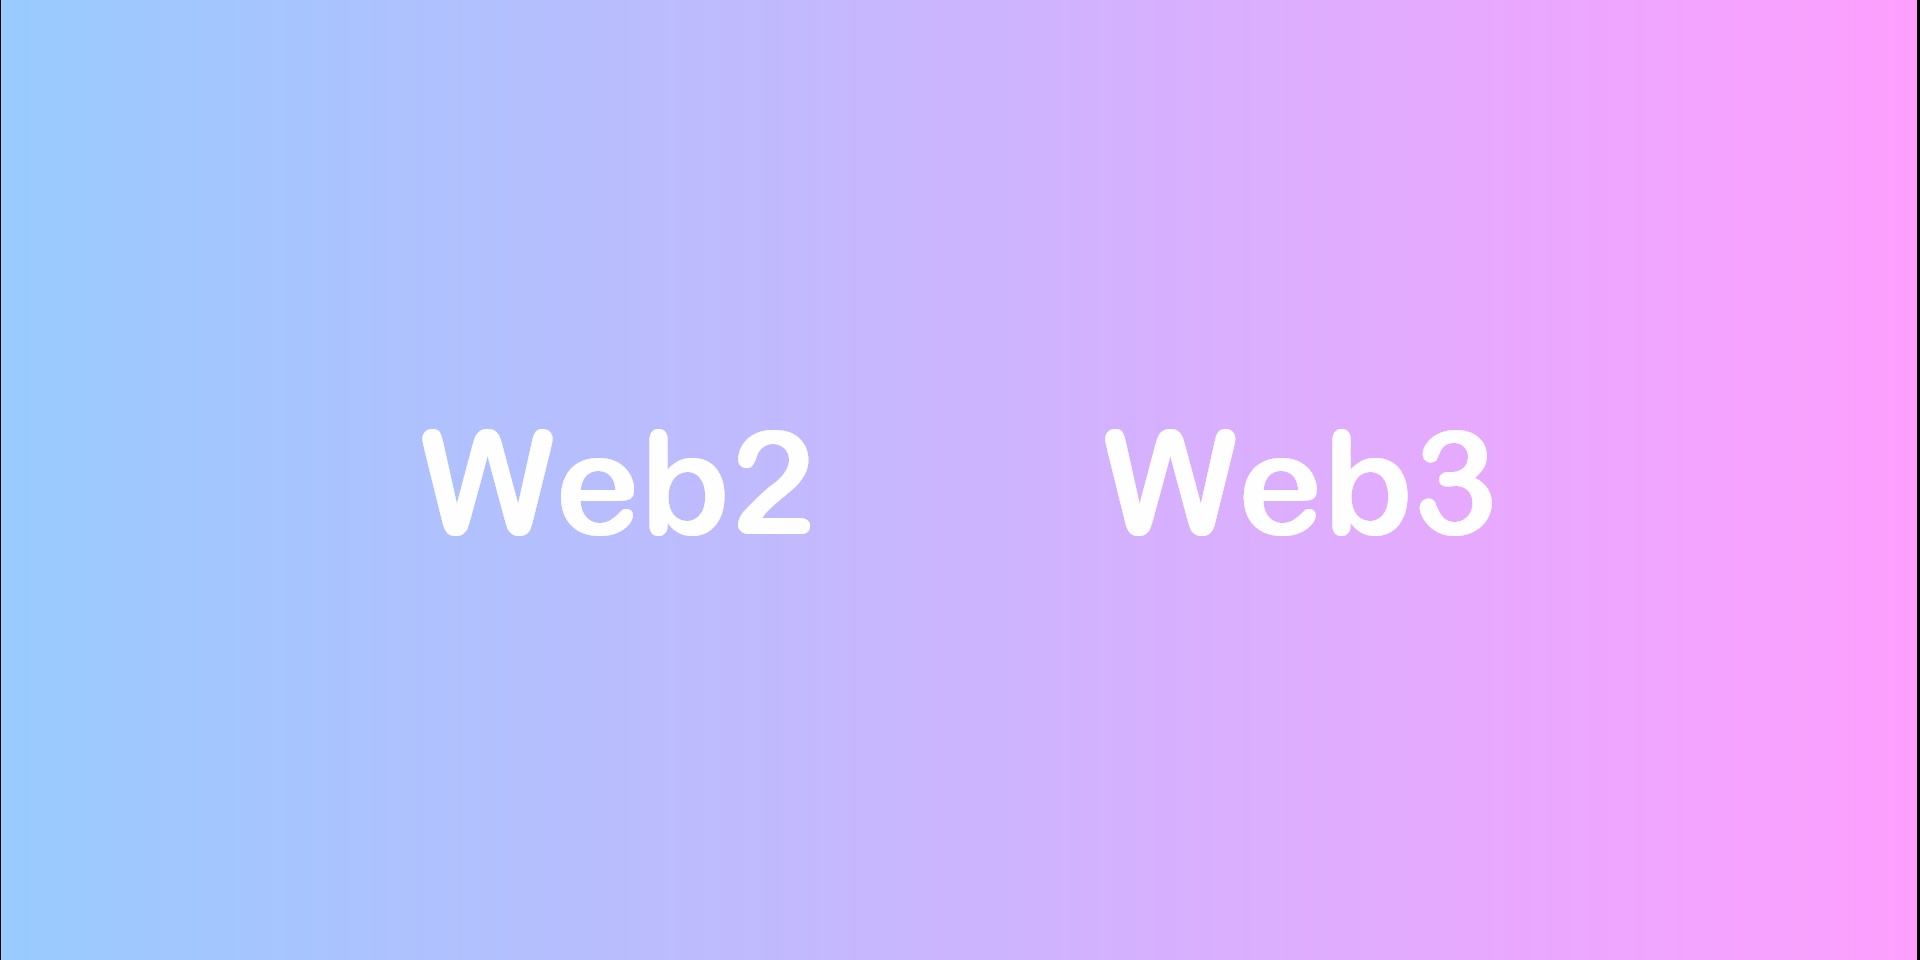 Web2 and Web3 amazing apps — Mike